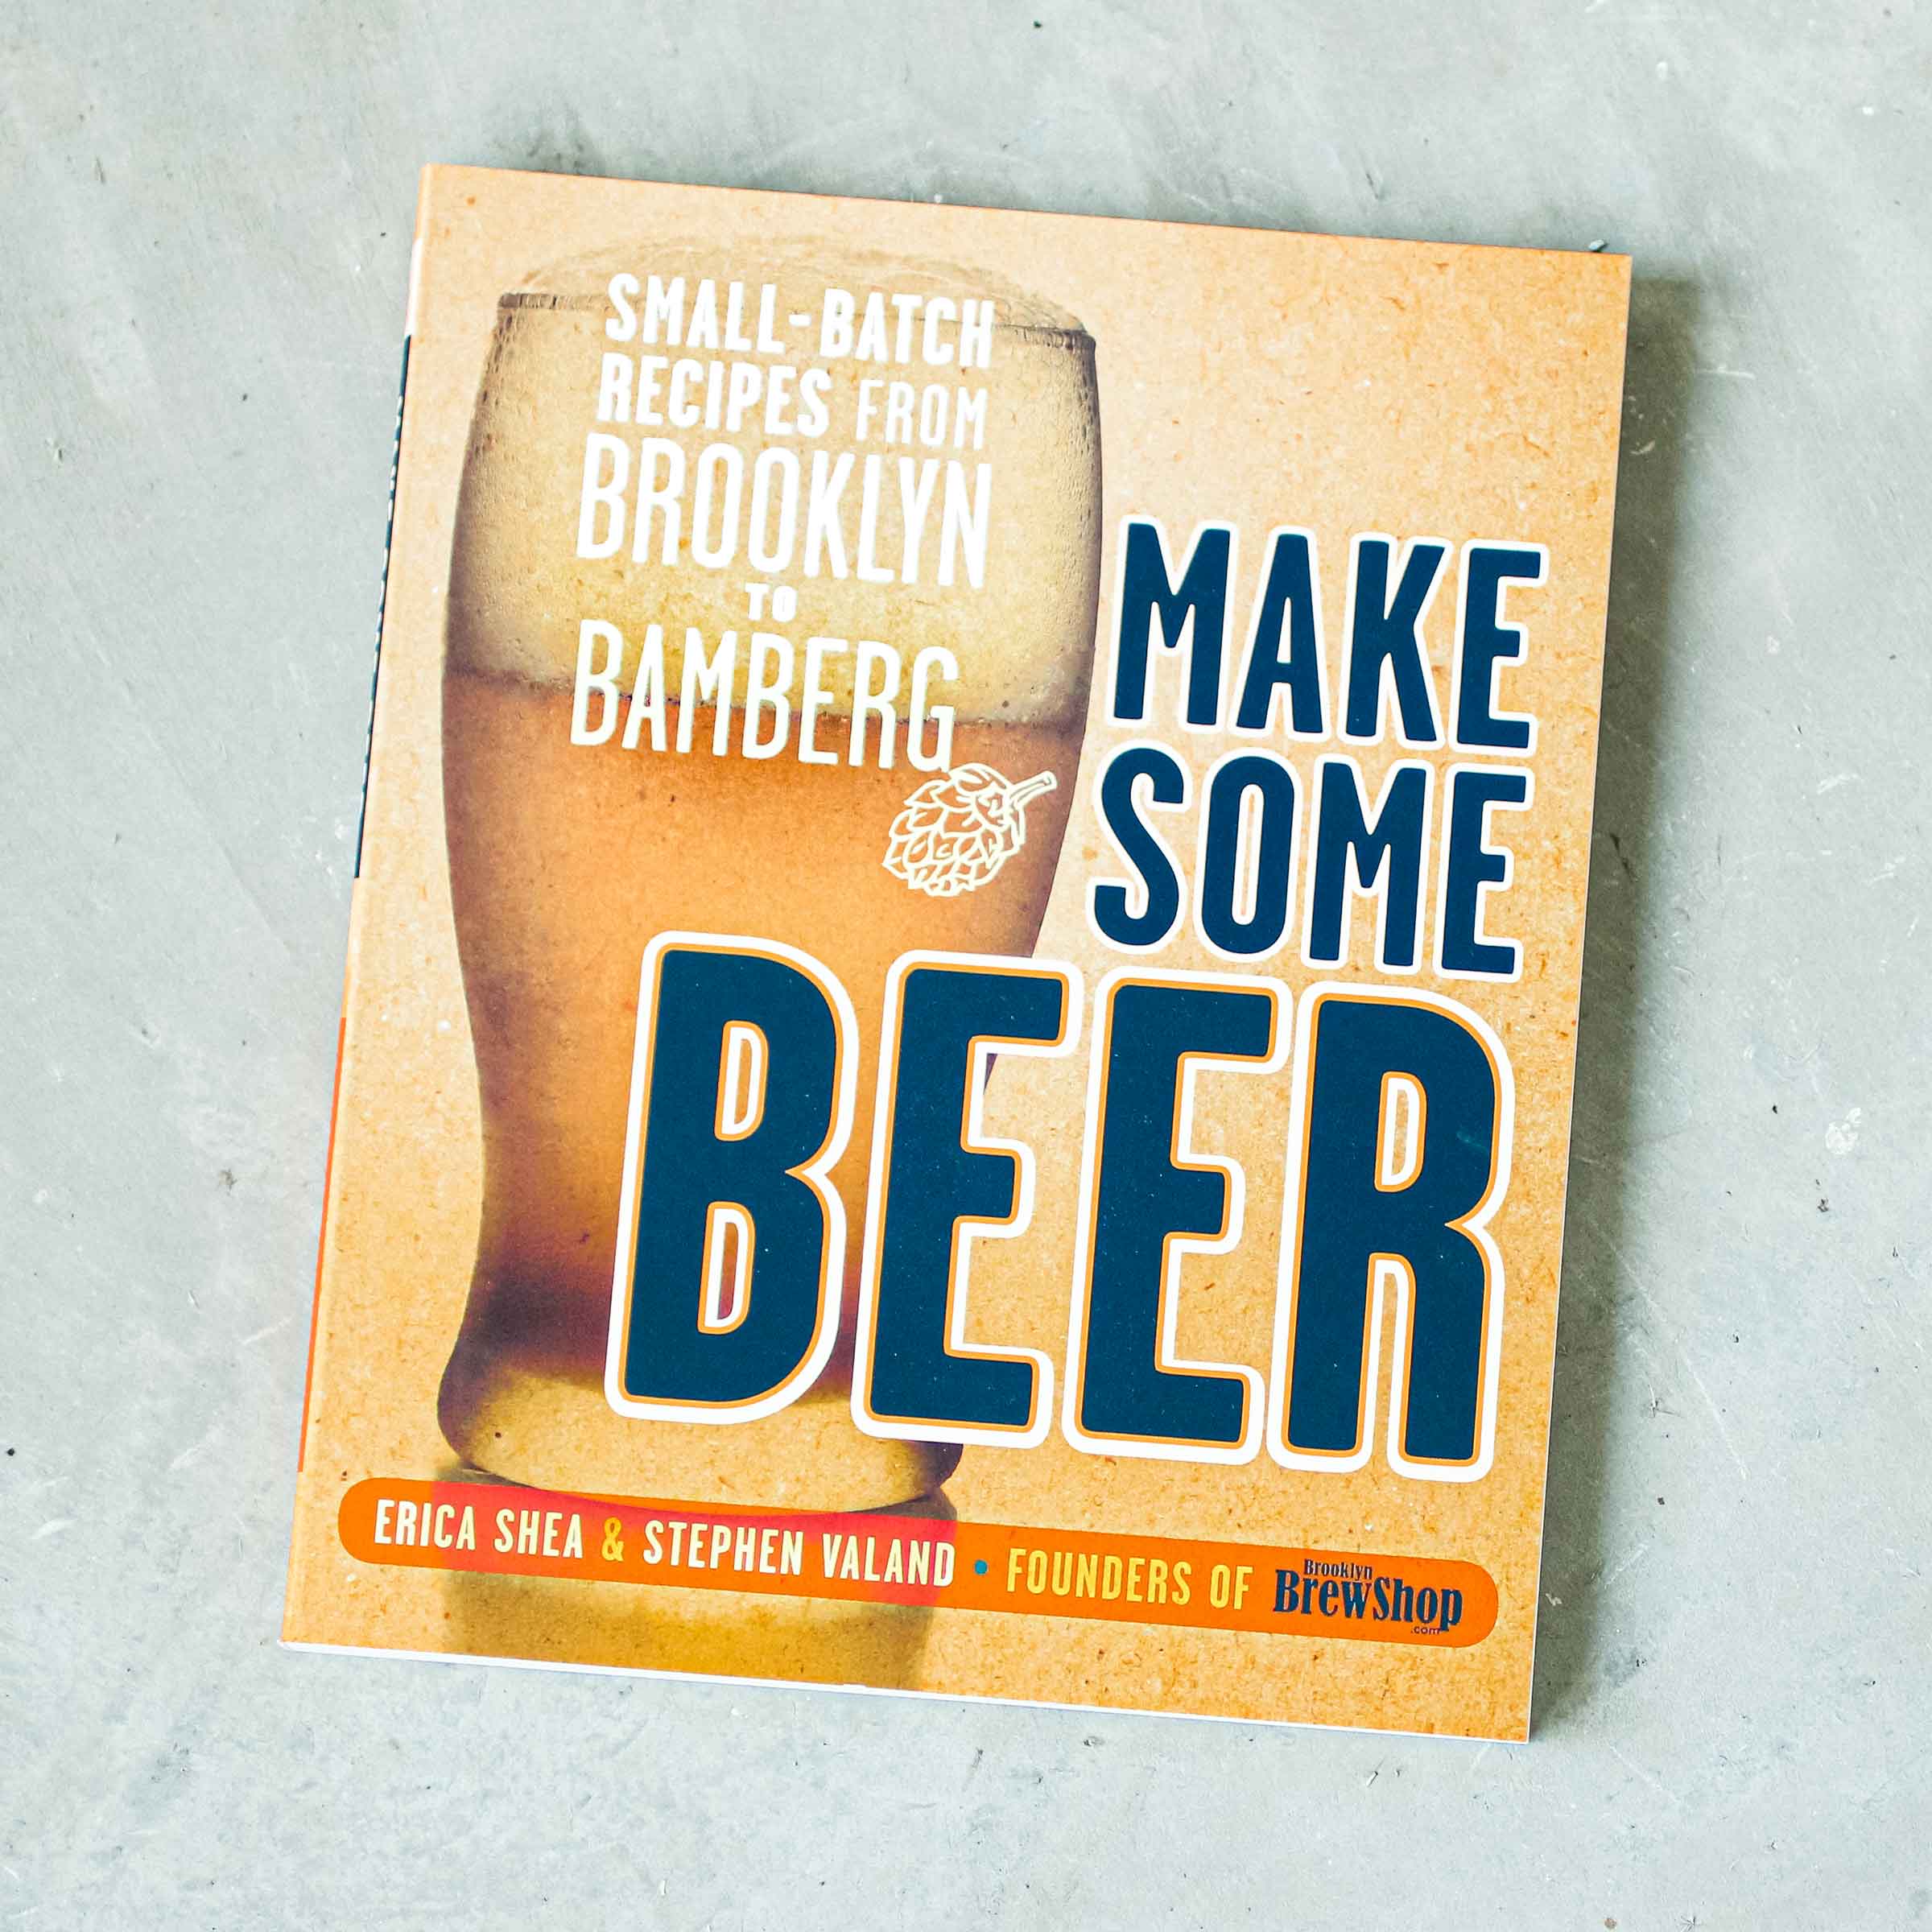 Image of Make Some Beer: Small-Batch Recipes from Brooklyn to Bamberg